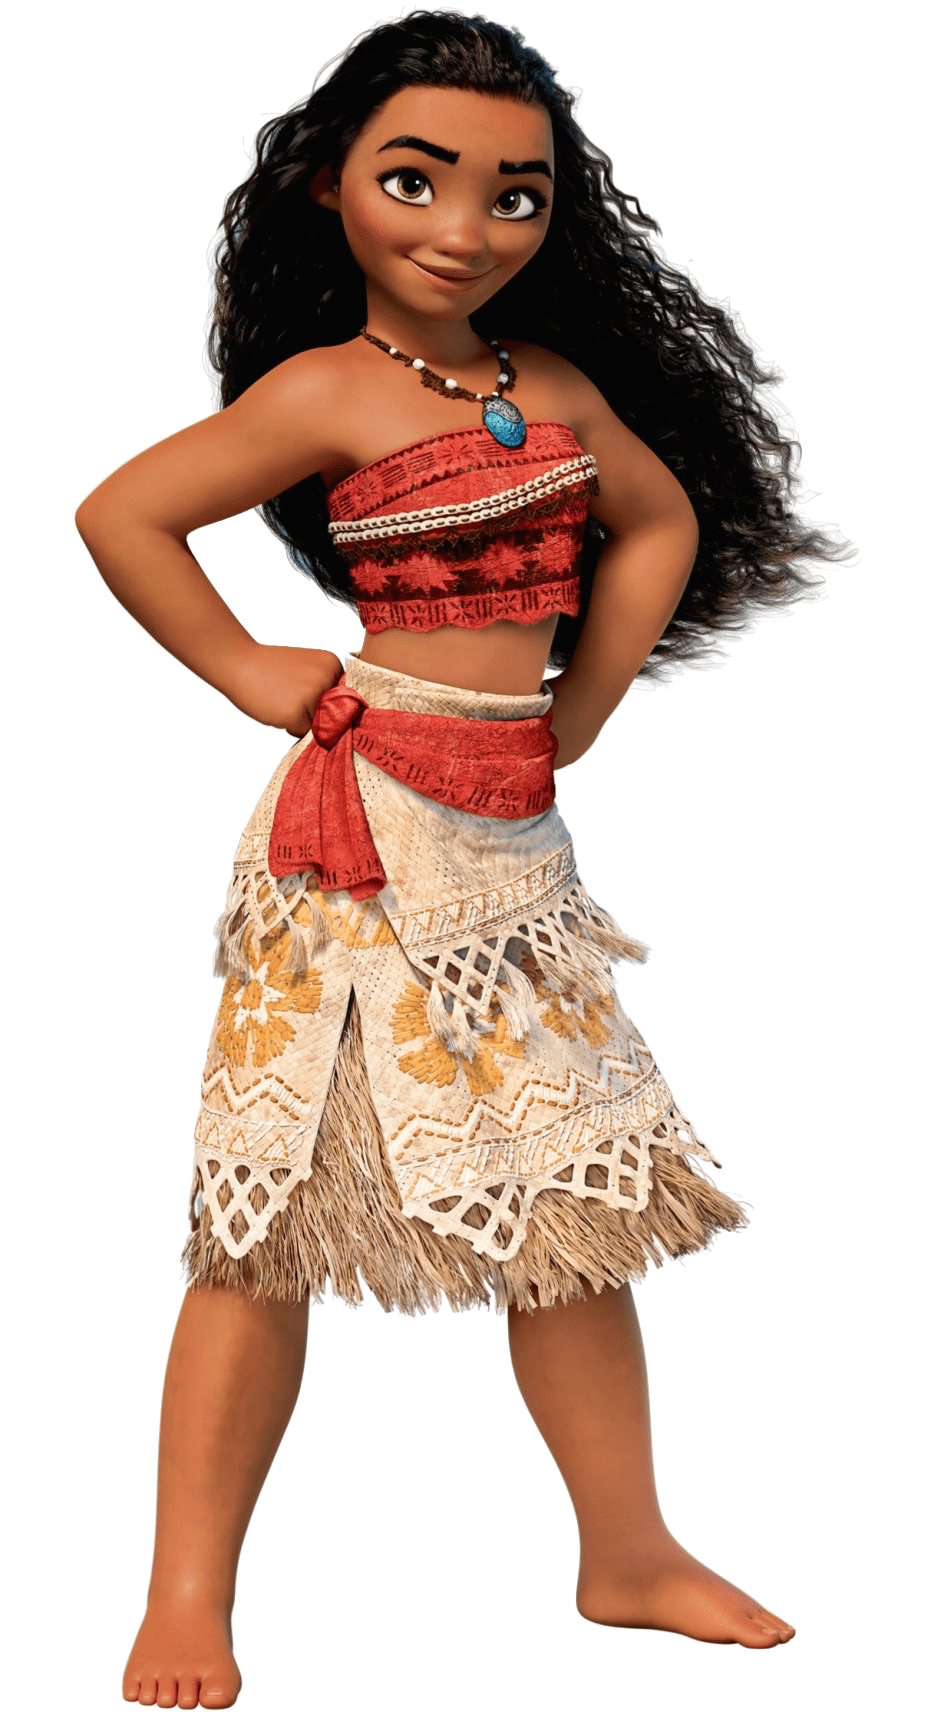 Free Moana Clipart, Download Free Clip Art, Free Clip Art on.